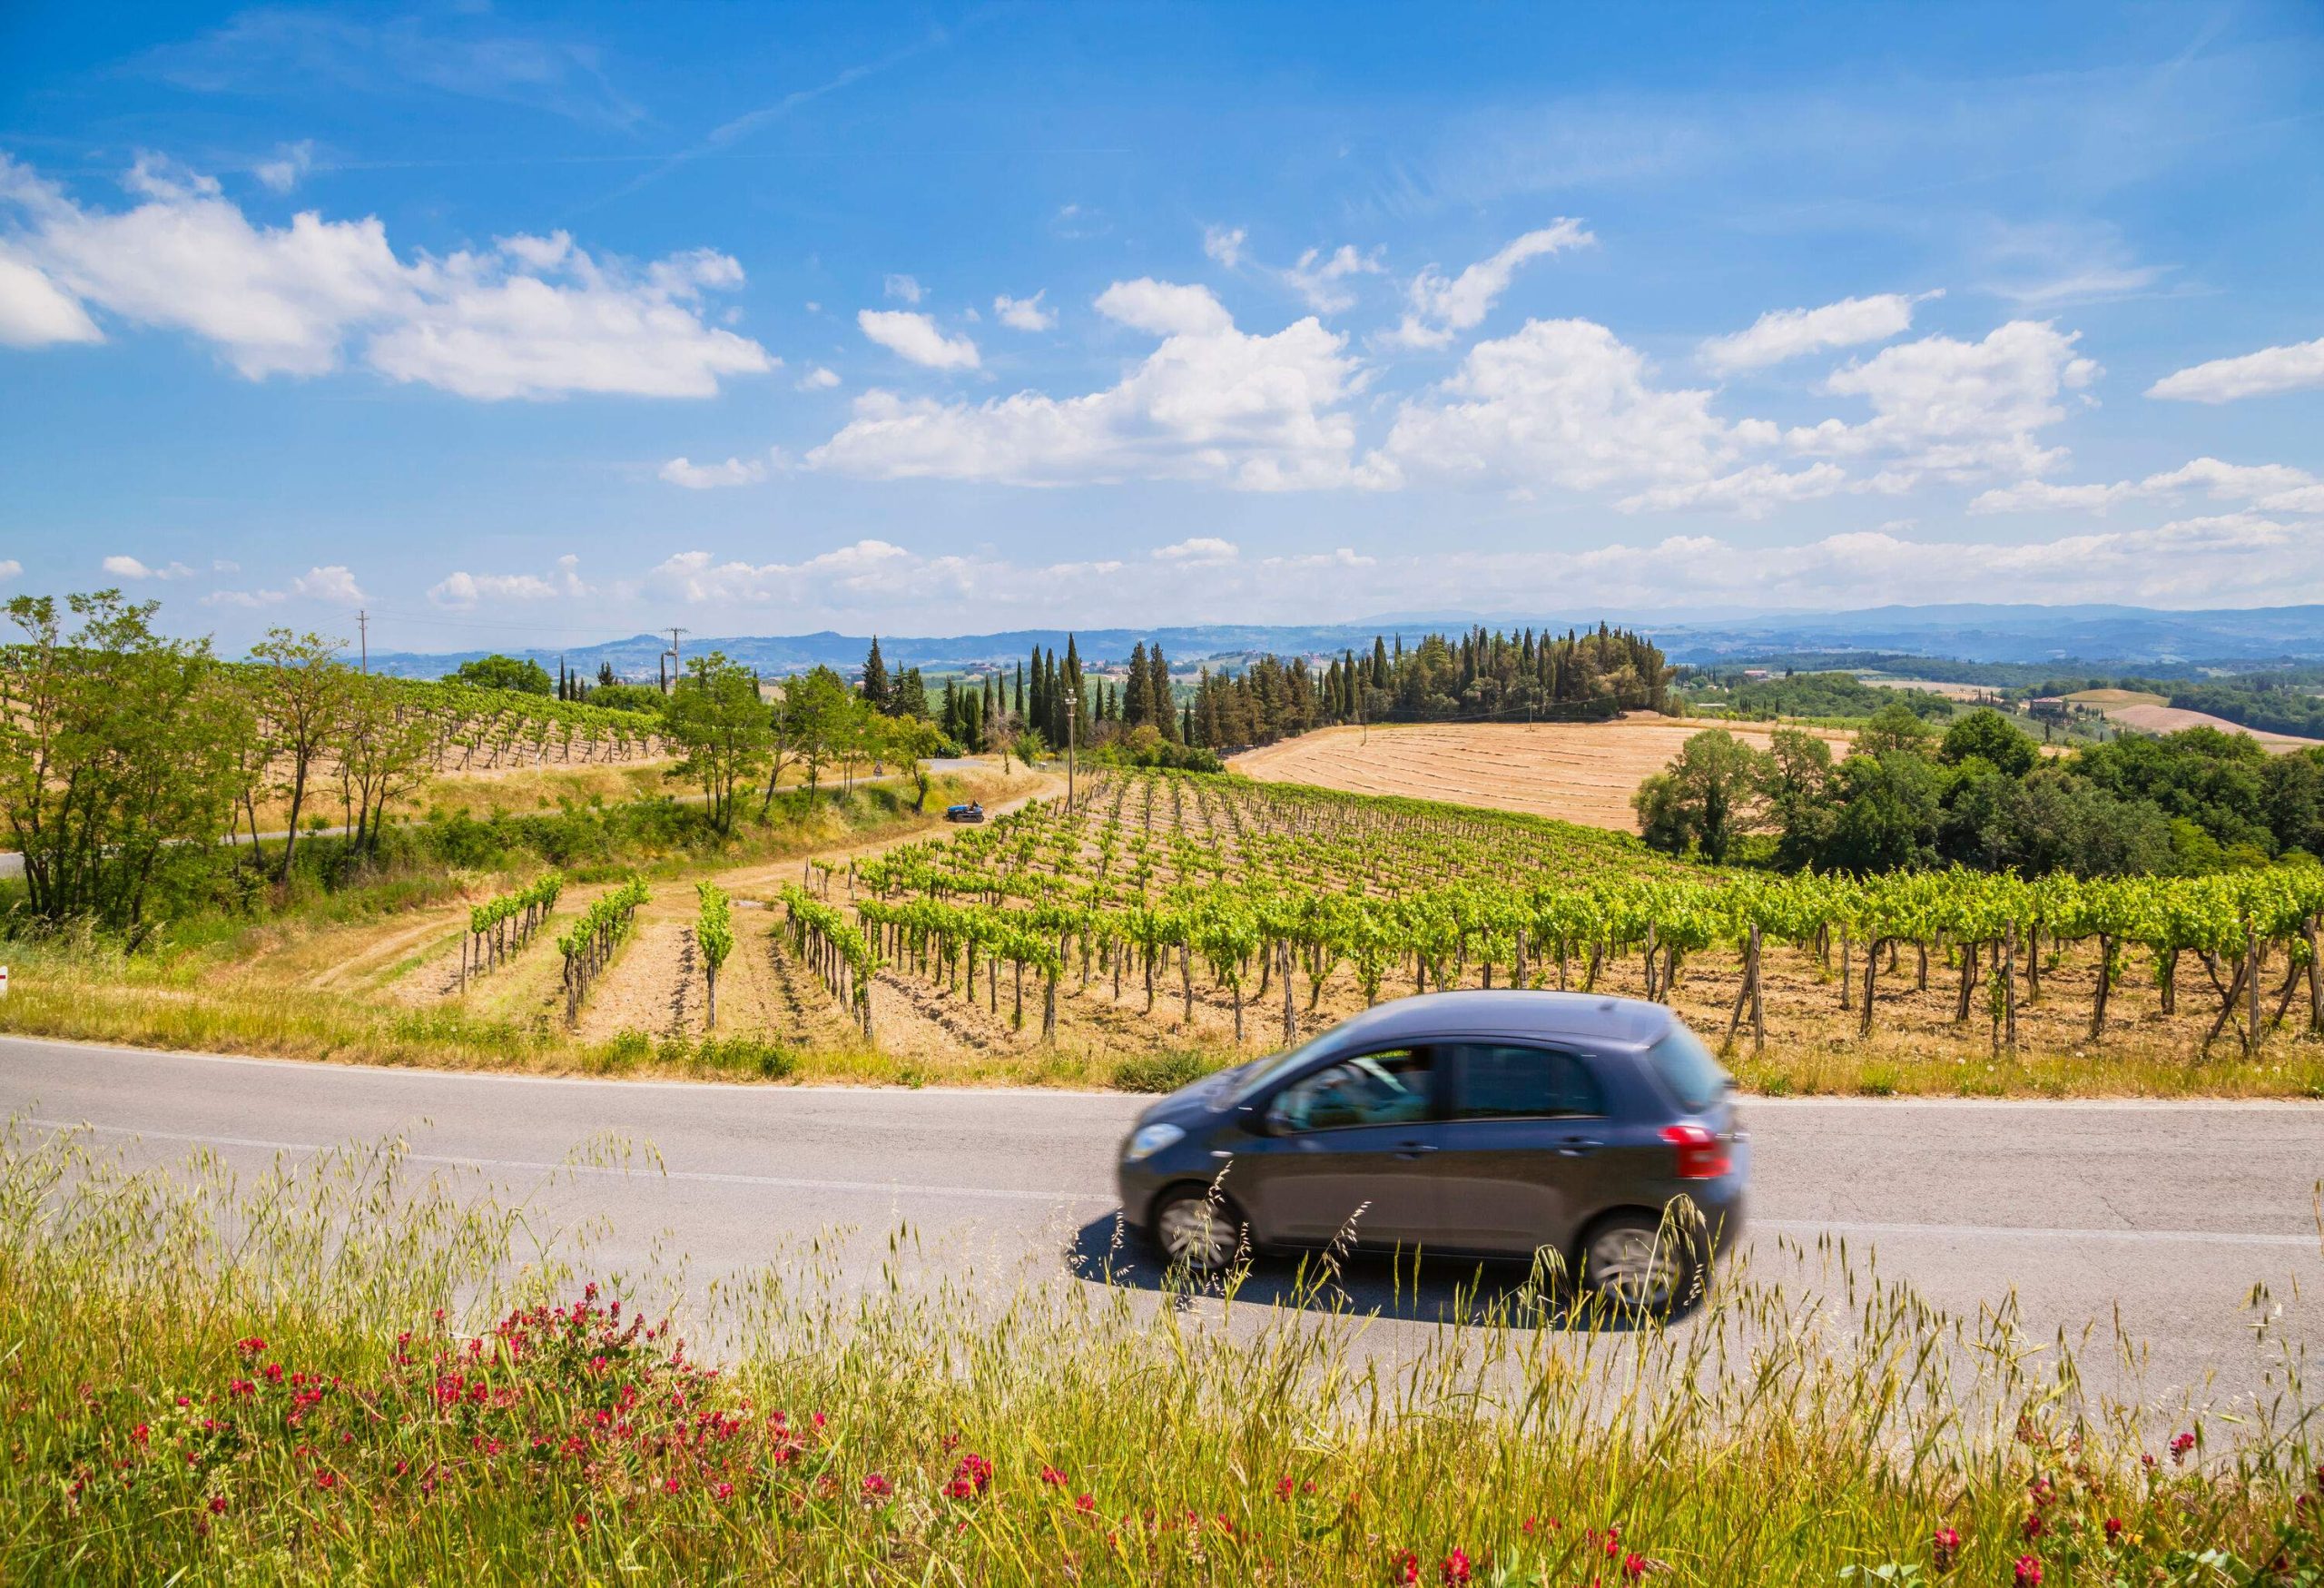 A car on the road passing by expansive vineyards and plantation fields.